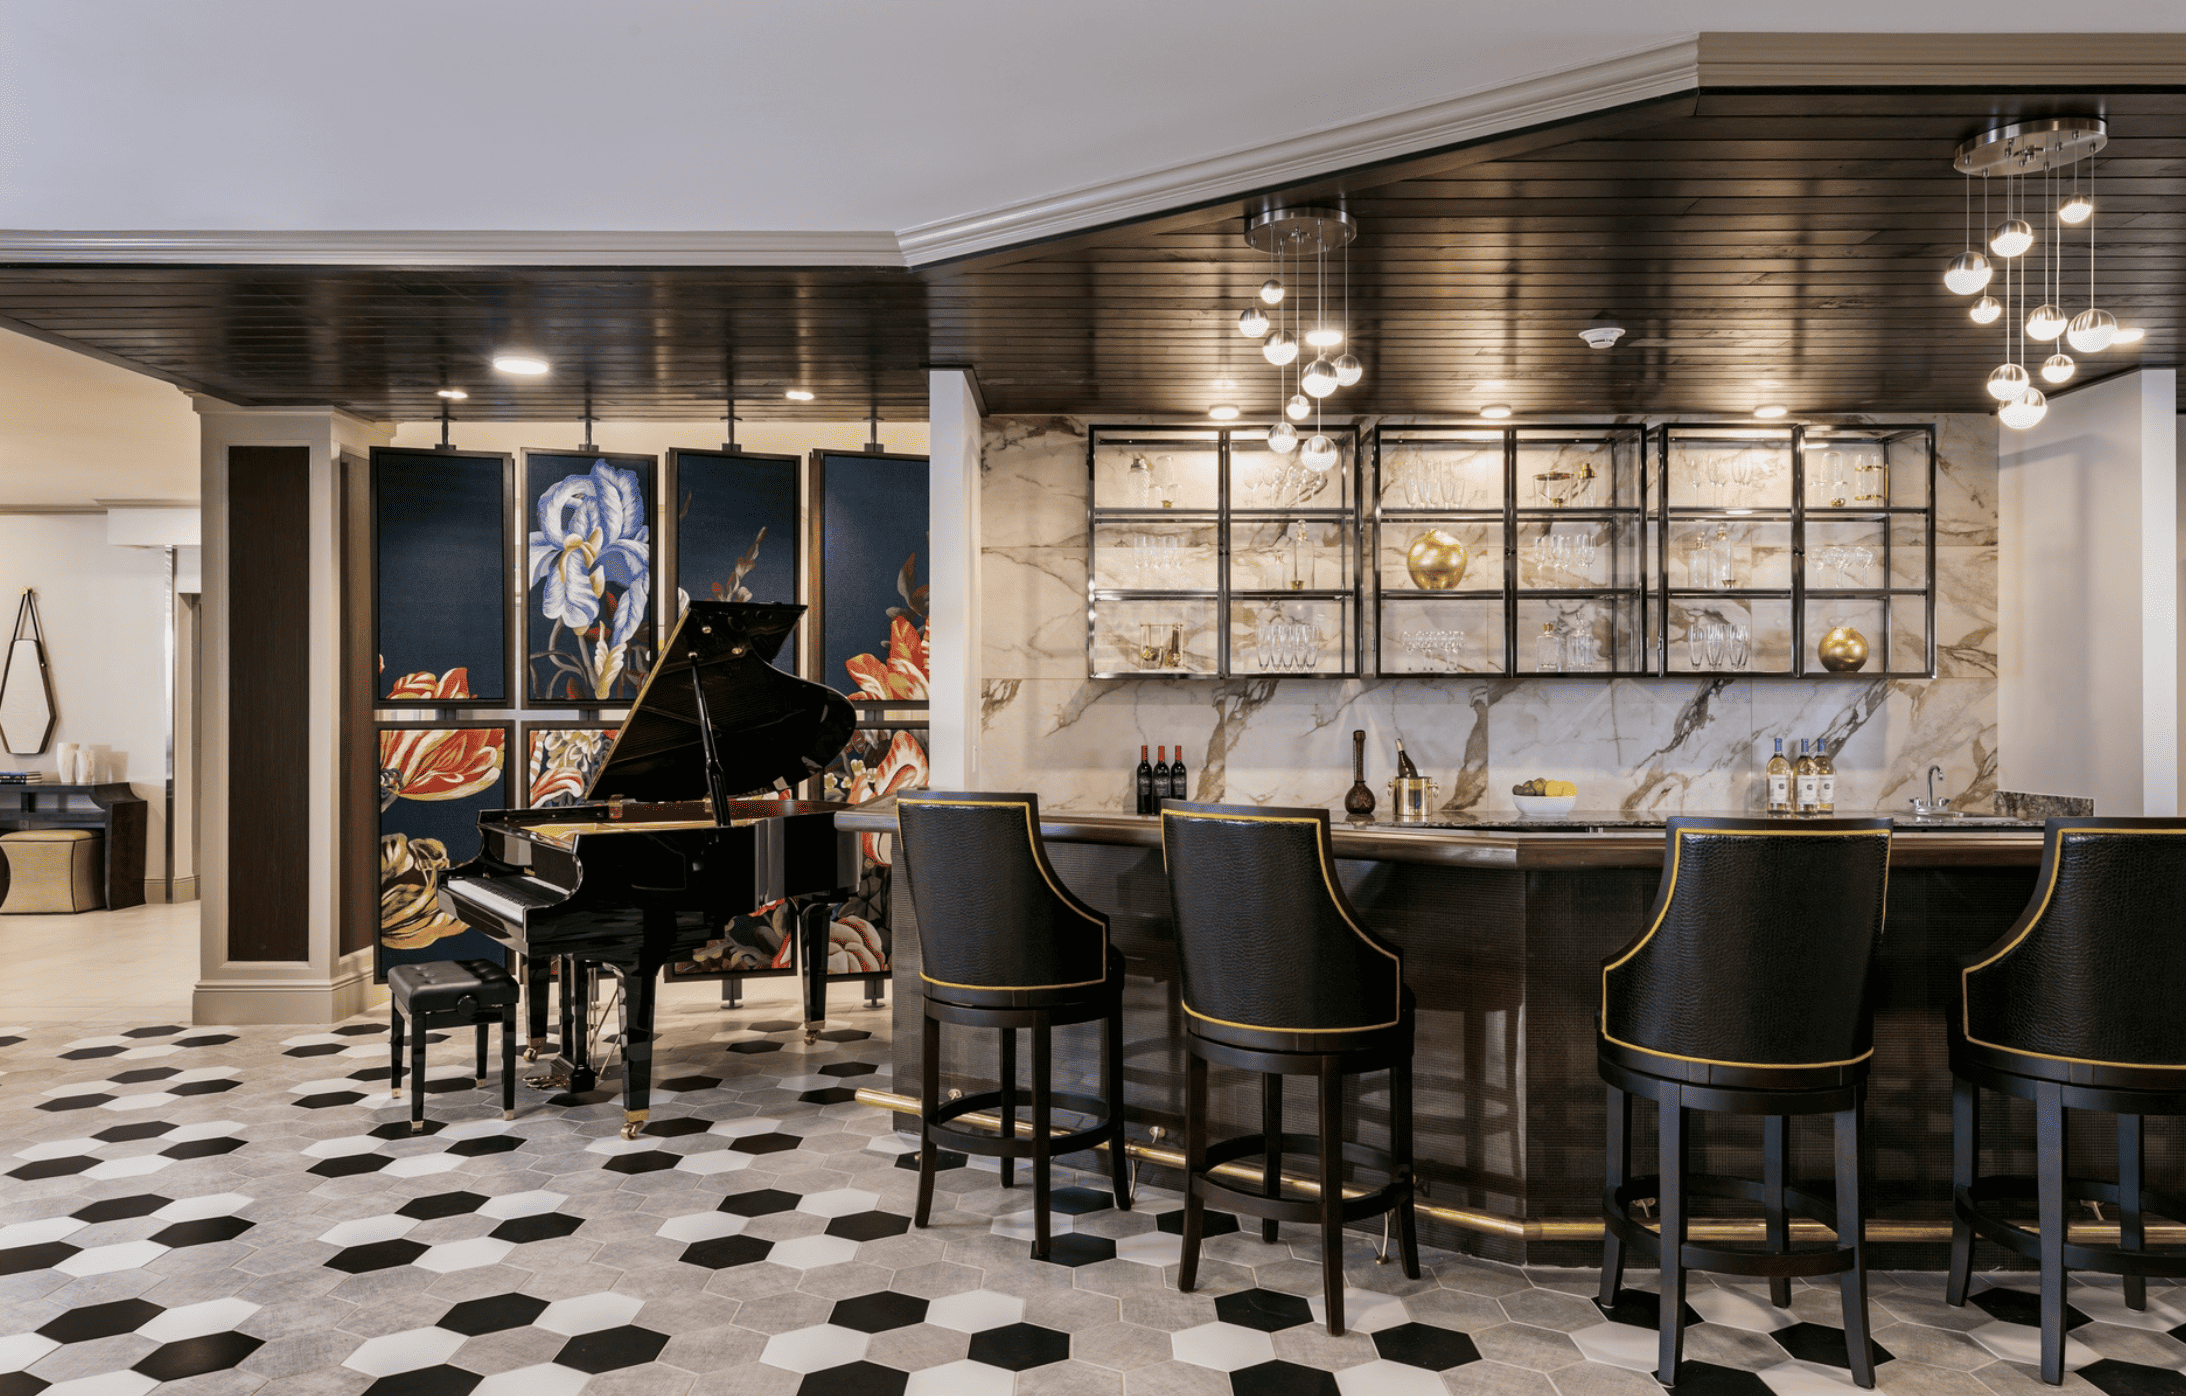 A bar and grand piano lounge at the Harborchase of Germantown.